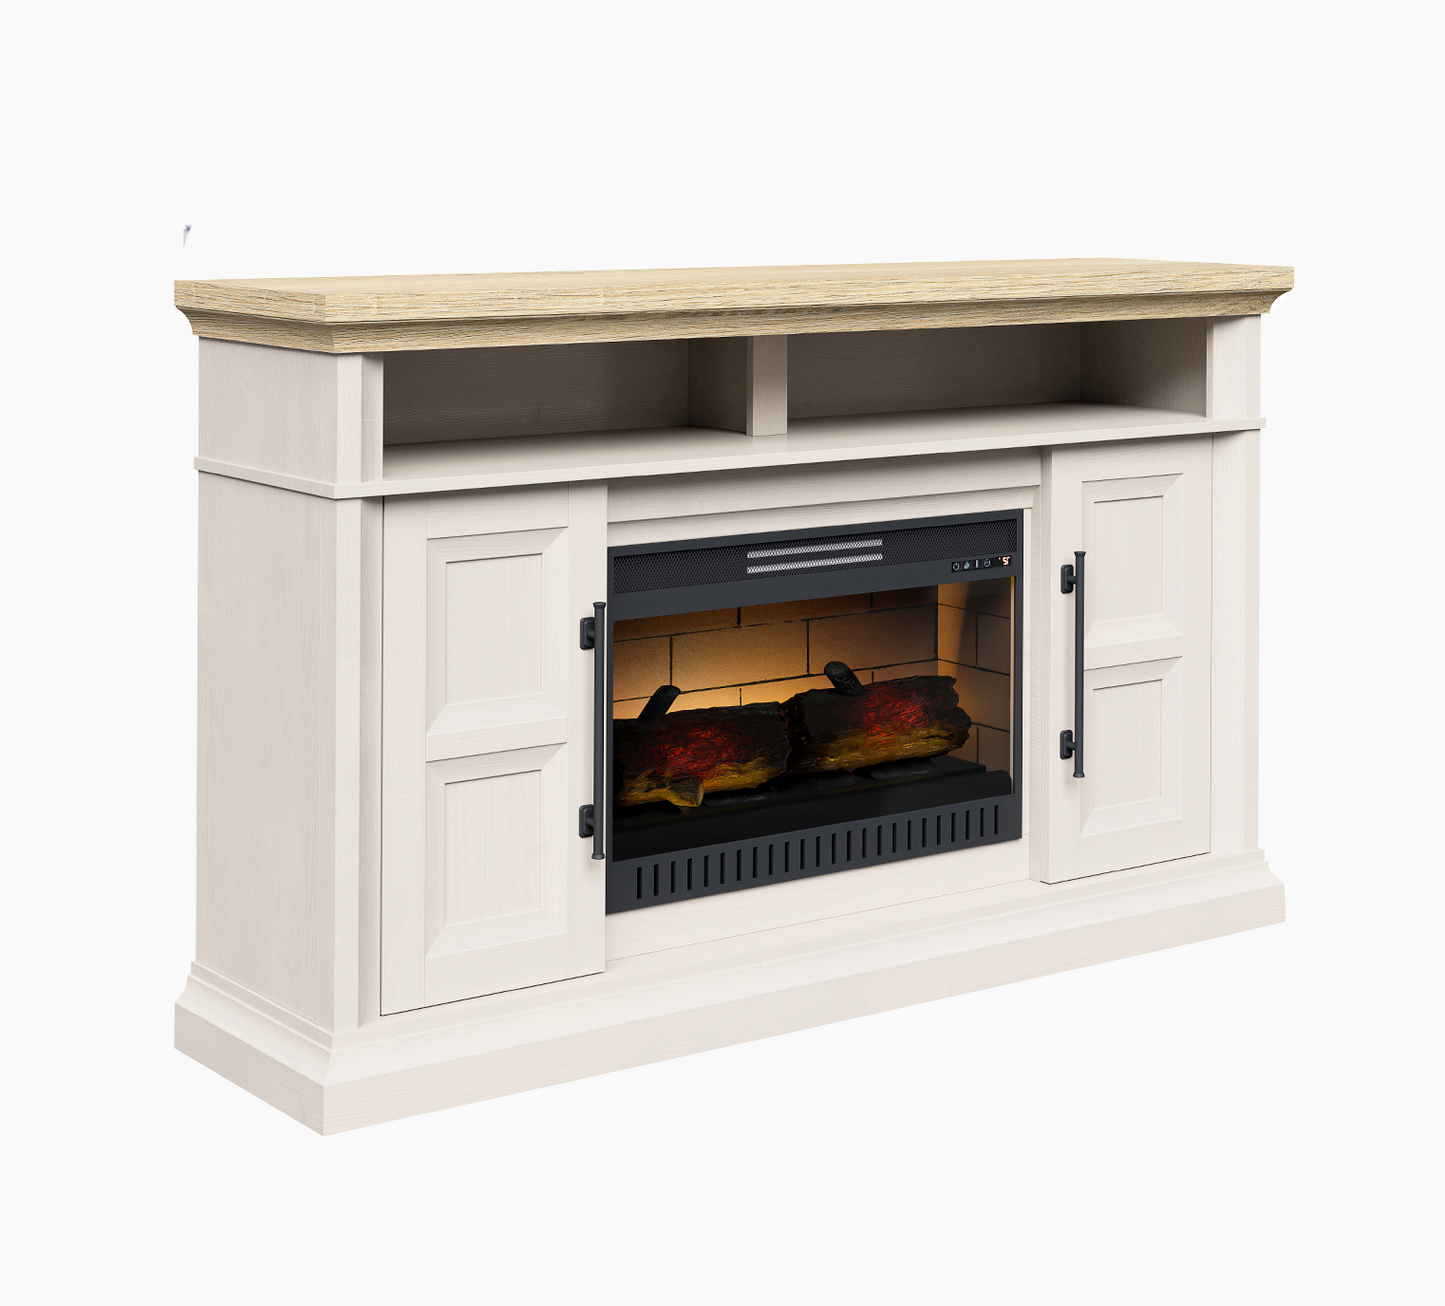 Granger Two Tone Fireplace with 26" Insert